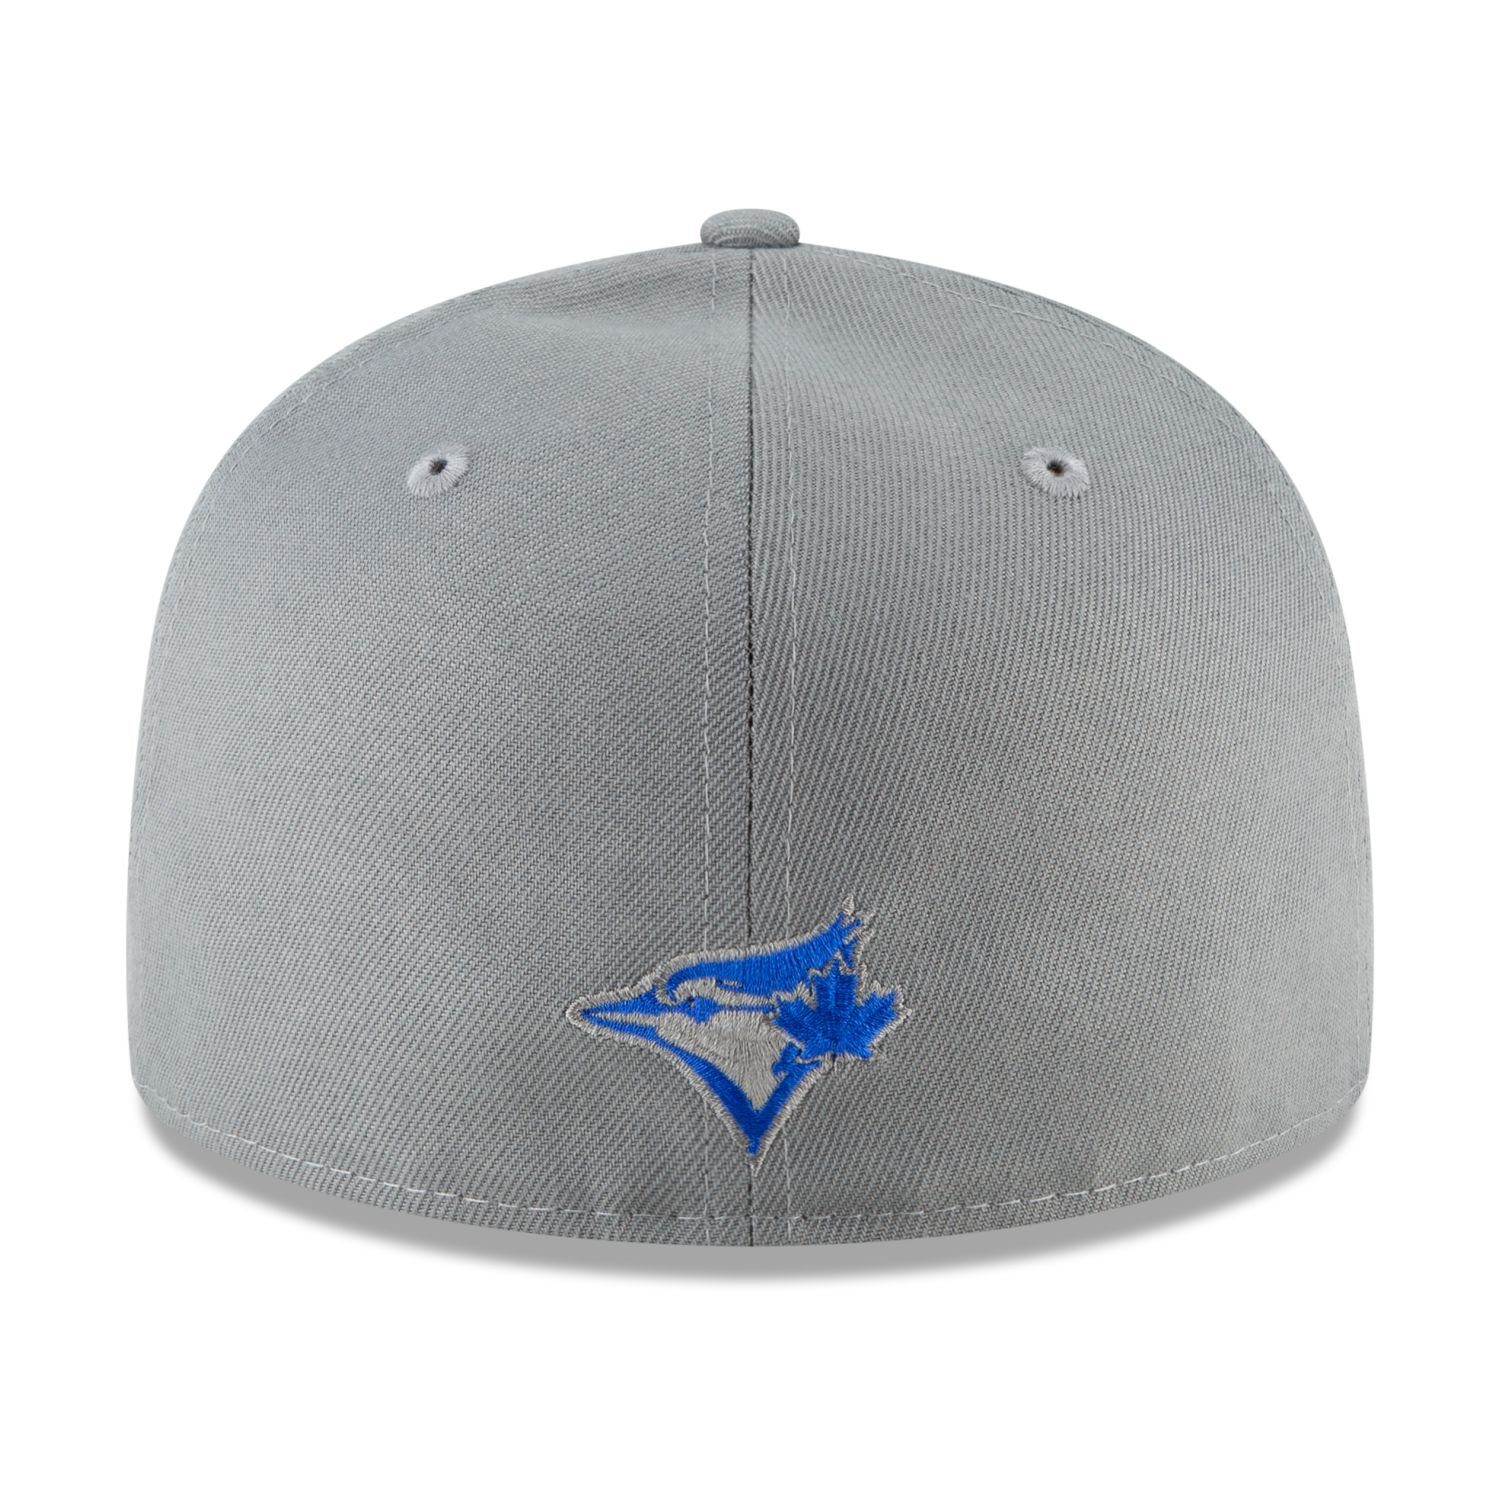 Fitted Blue Toronto STORM GREY 59Fifty MLB Jays New Cooperstown Team Era Cap